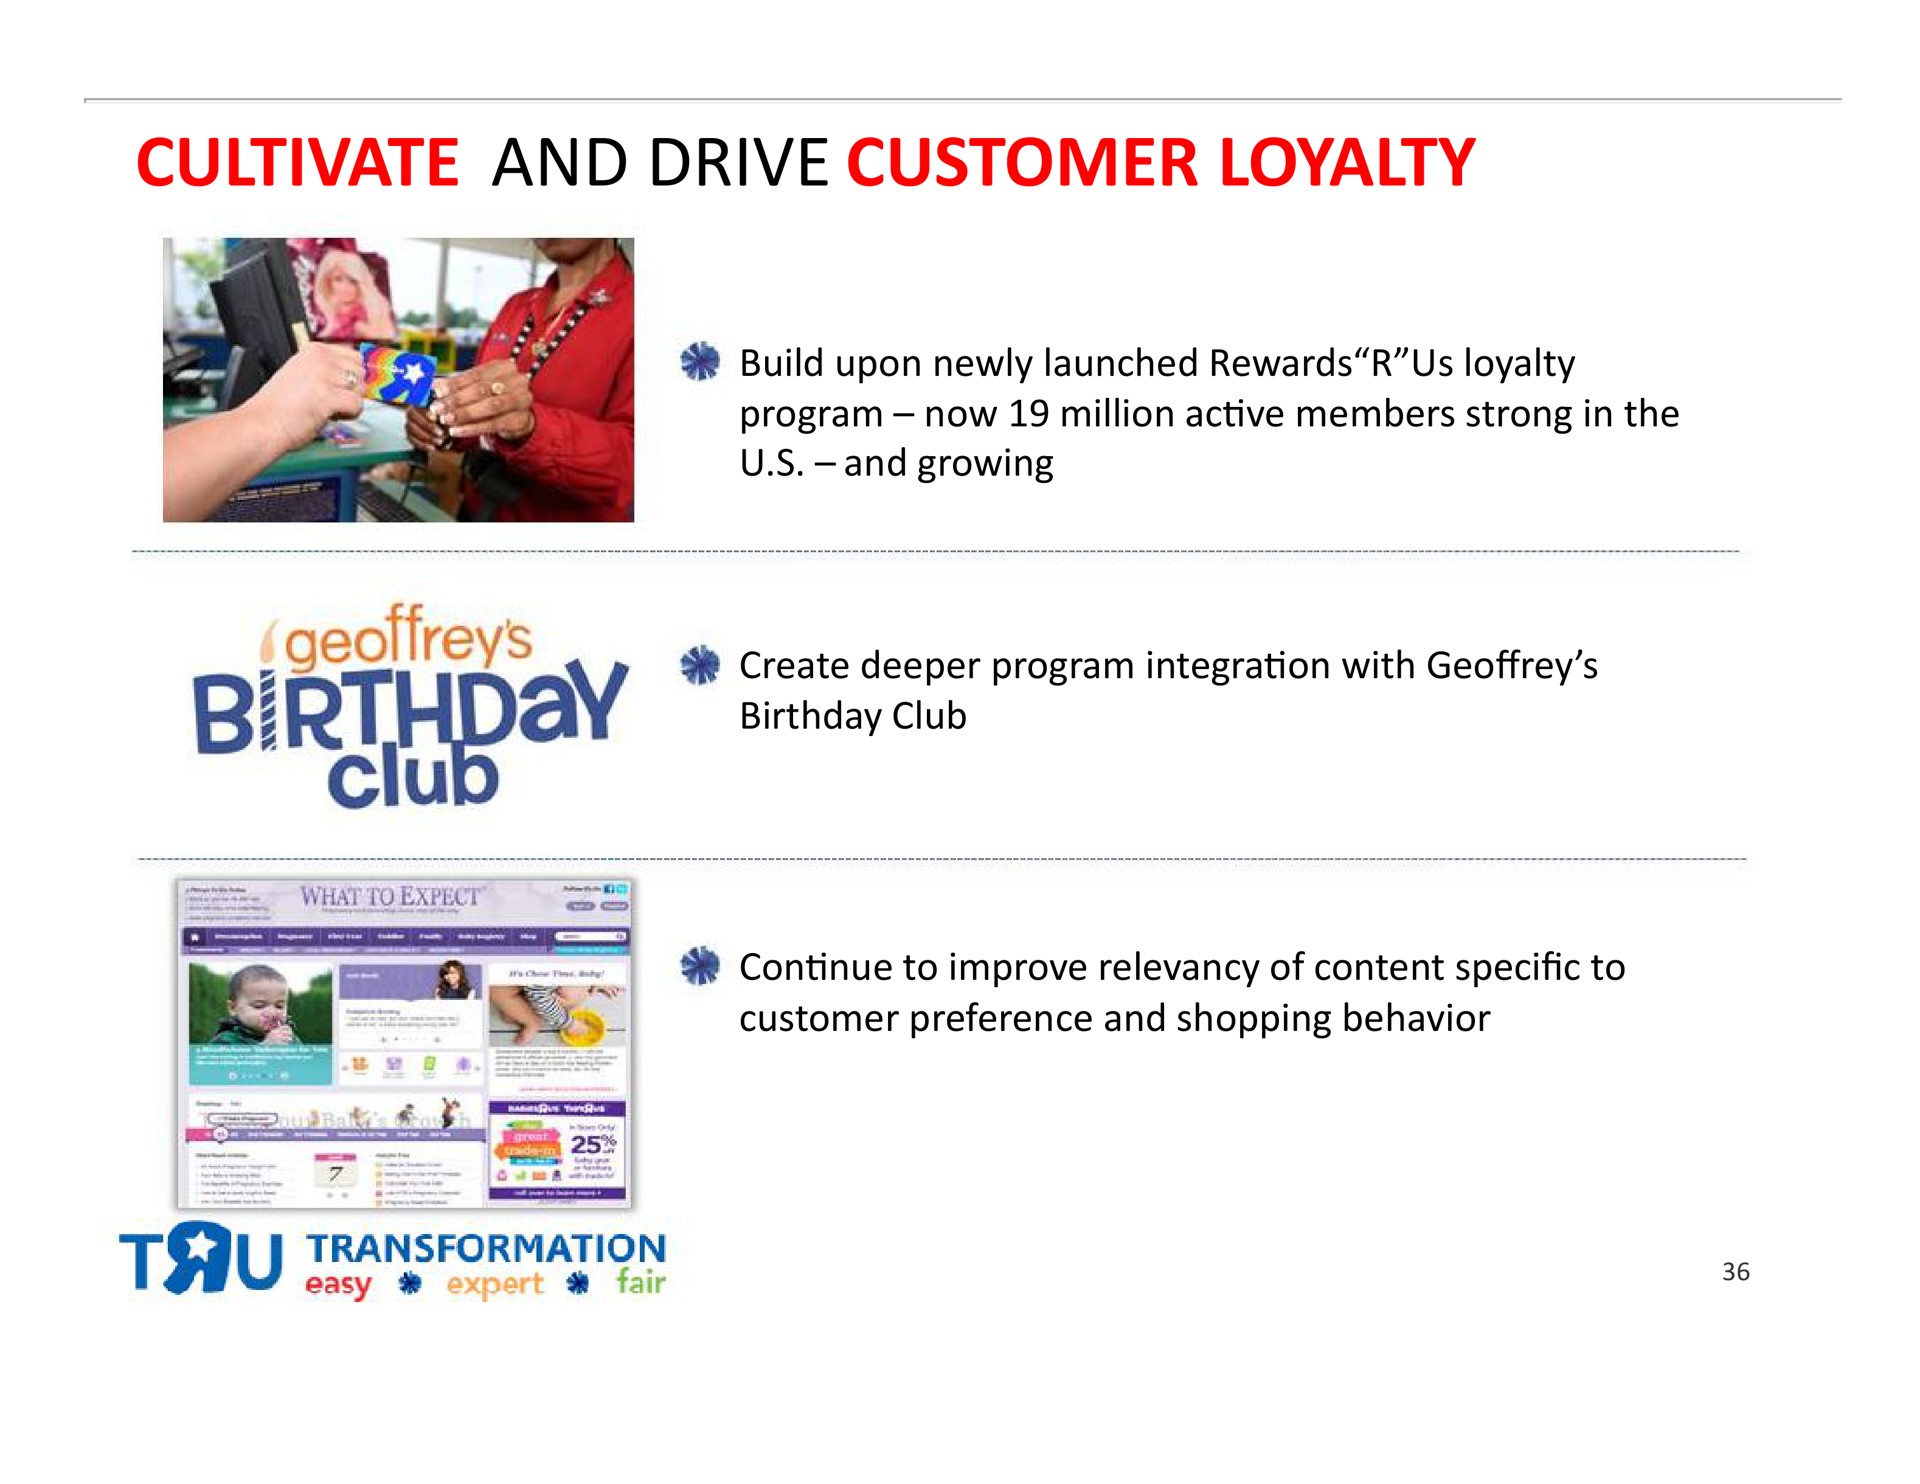 cultivate and drive customer loyalty bey birthday club | Toys R Us